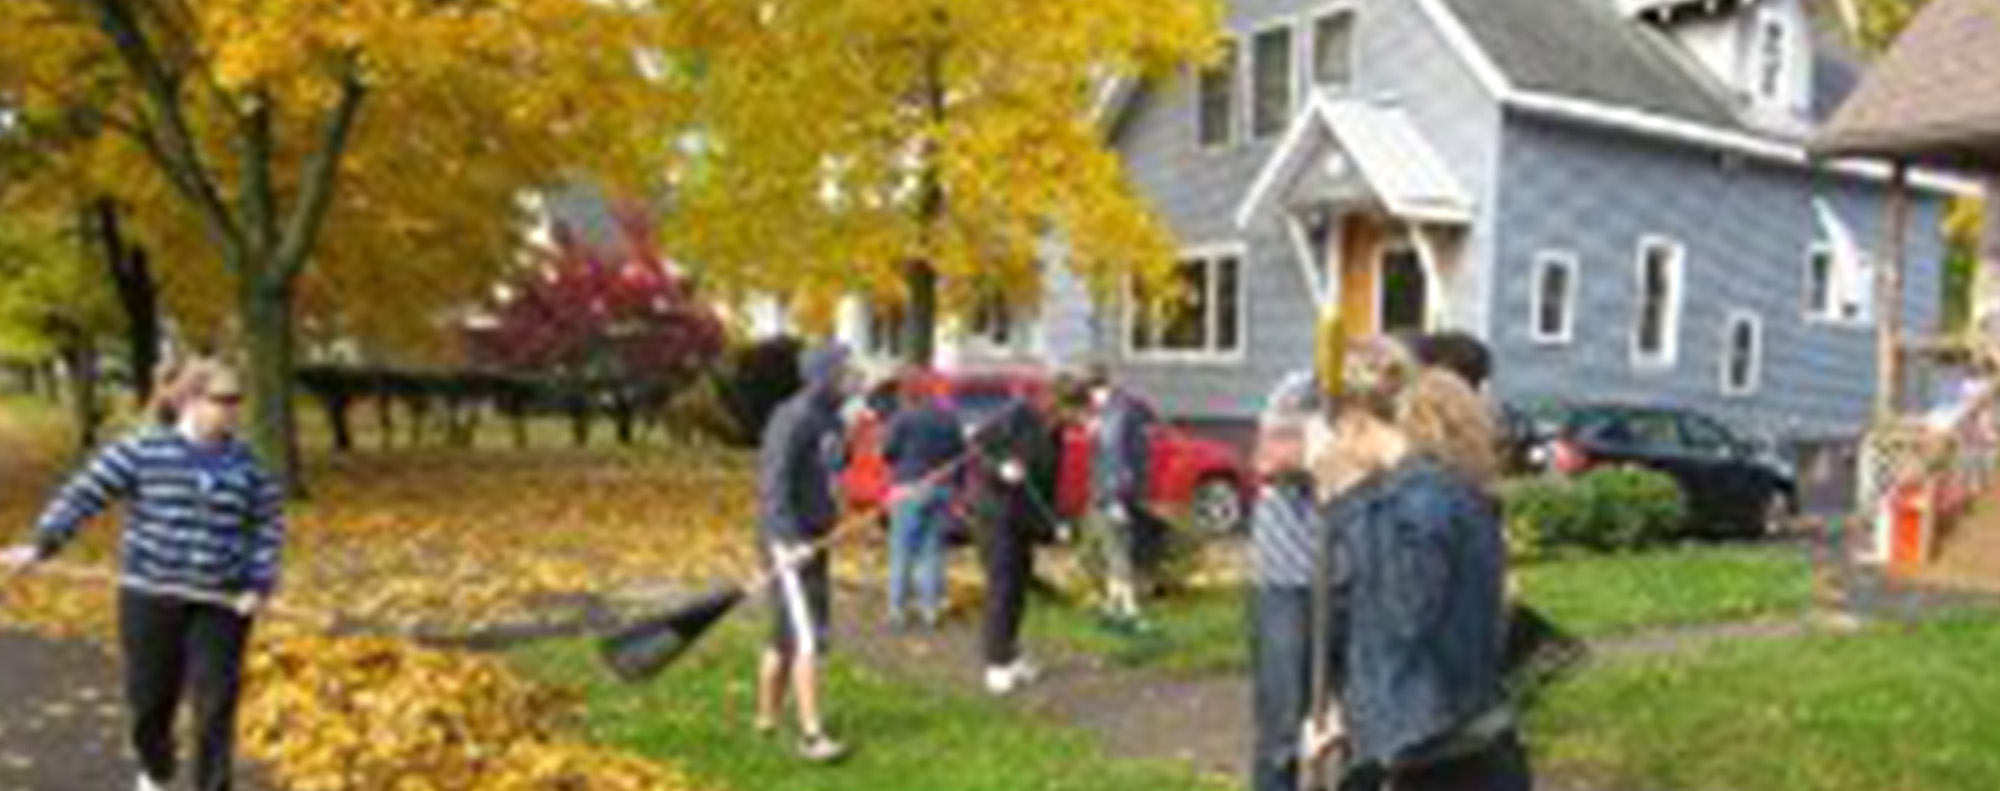 Oneida County Office for the Aging Intergenerational Fall Cleanup